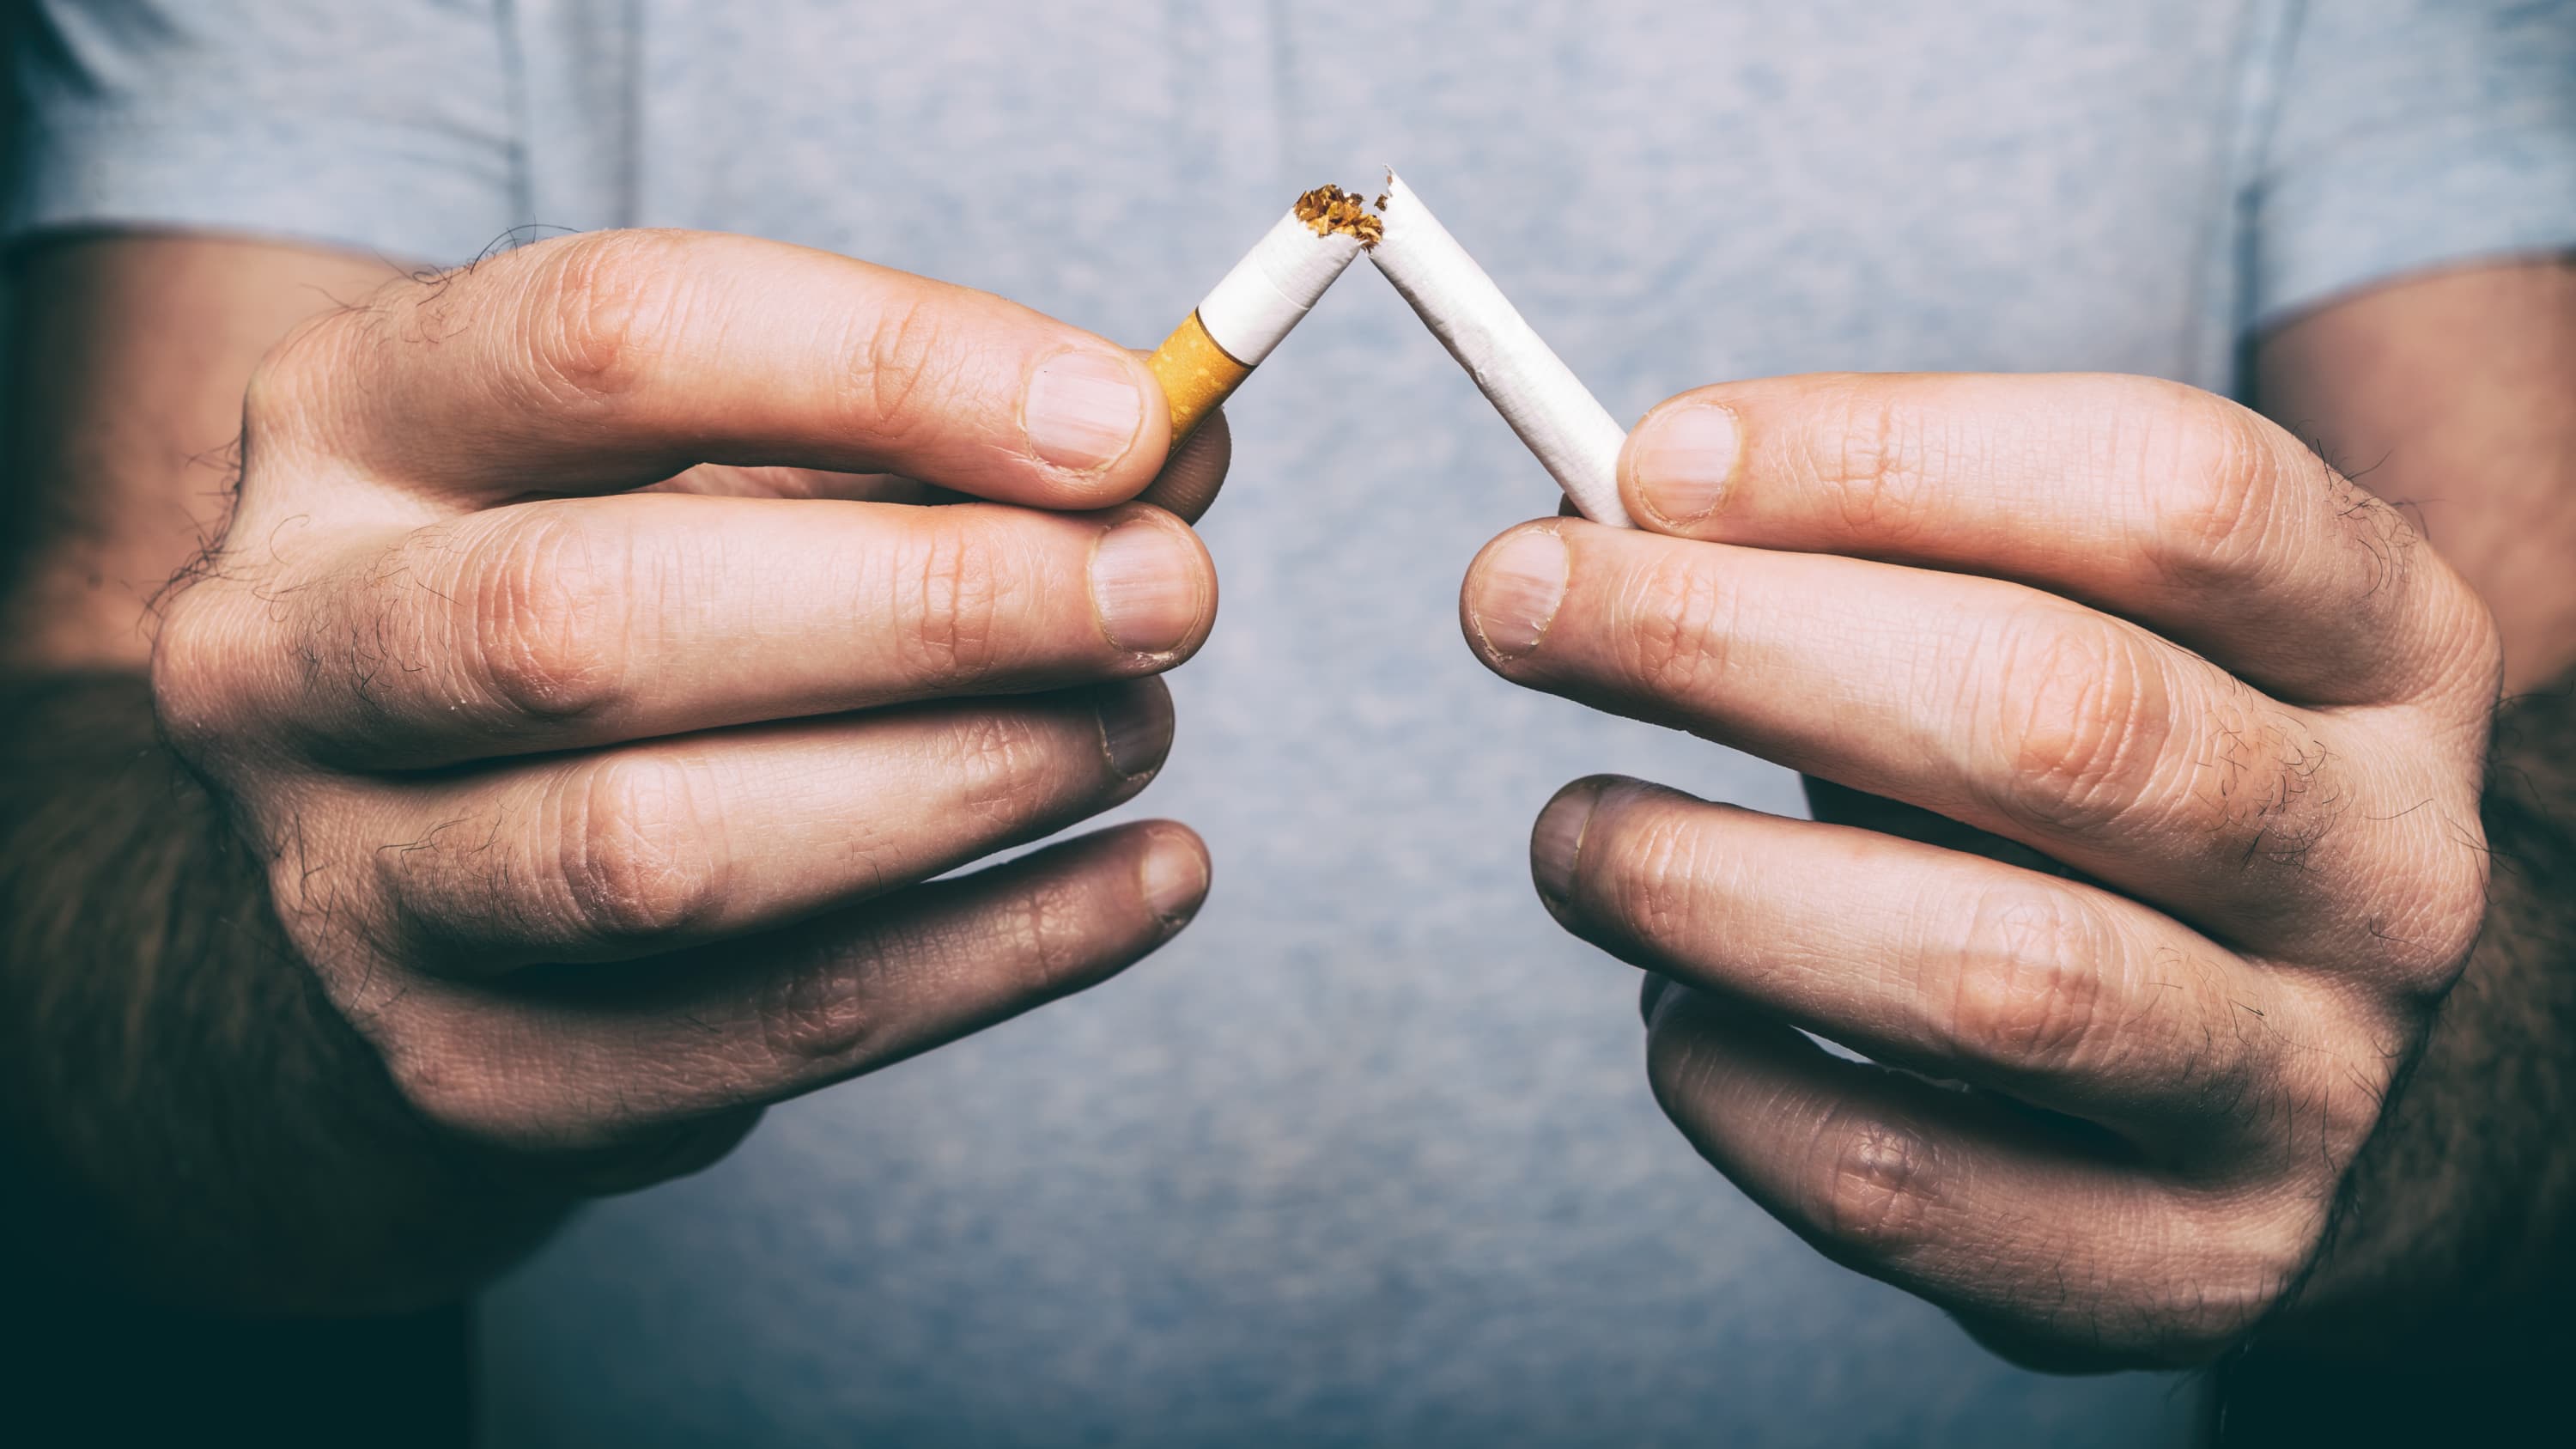 A man holds a broken cigarette. Resources exist at Yale Medicine to help smokers quit smoking.